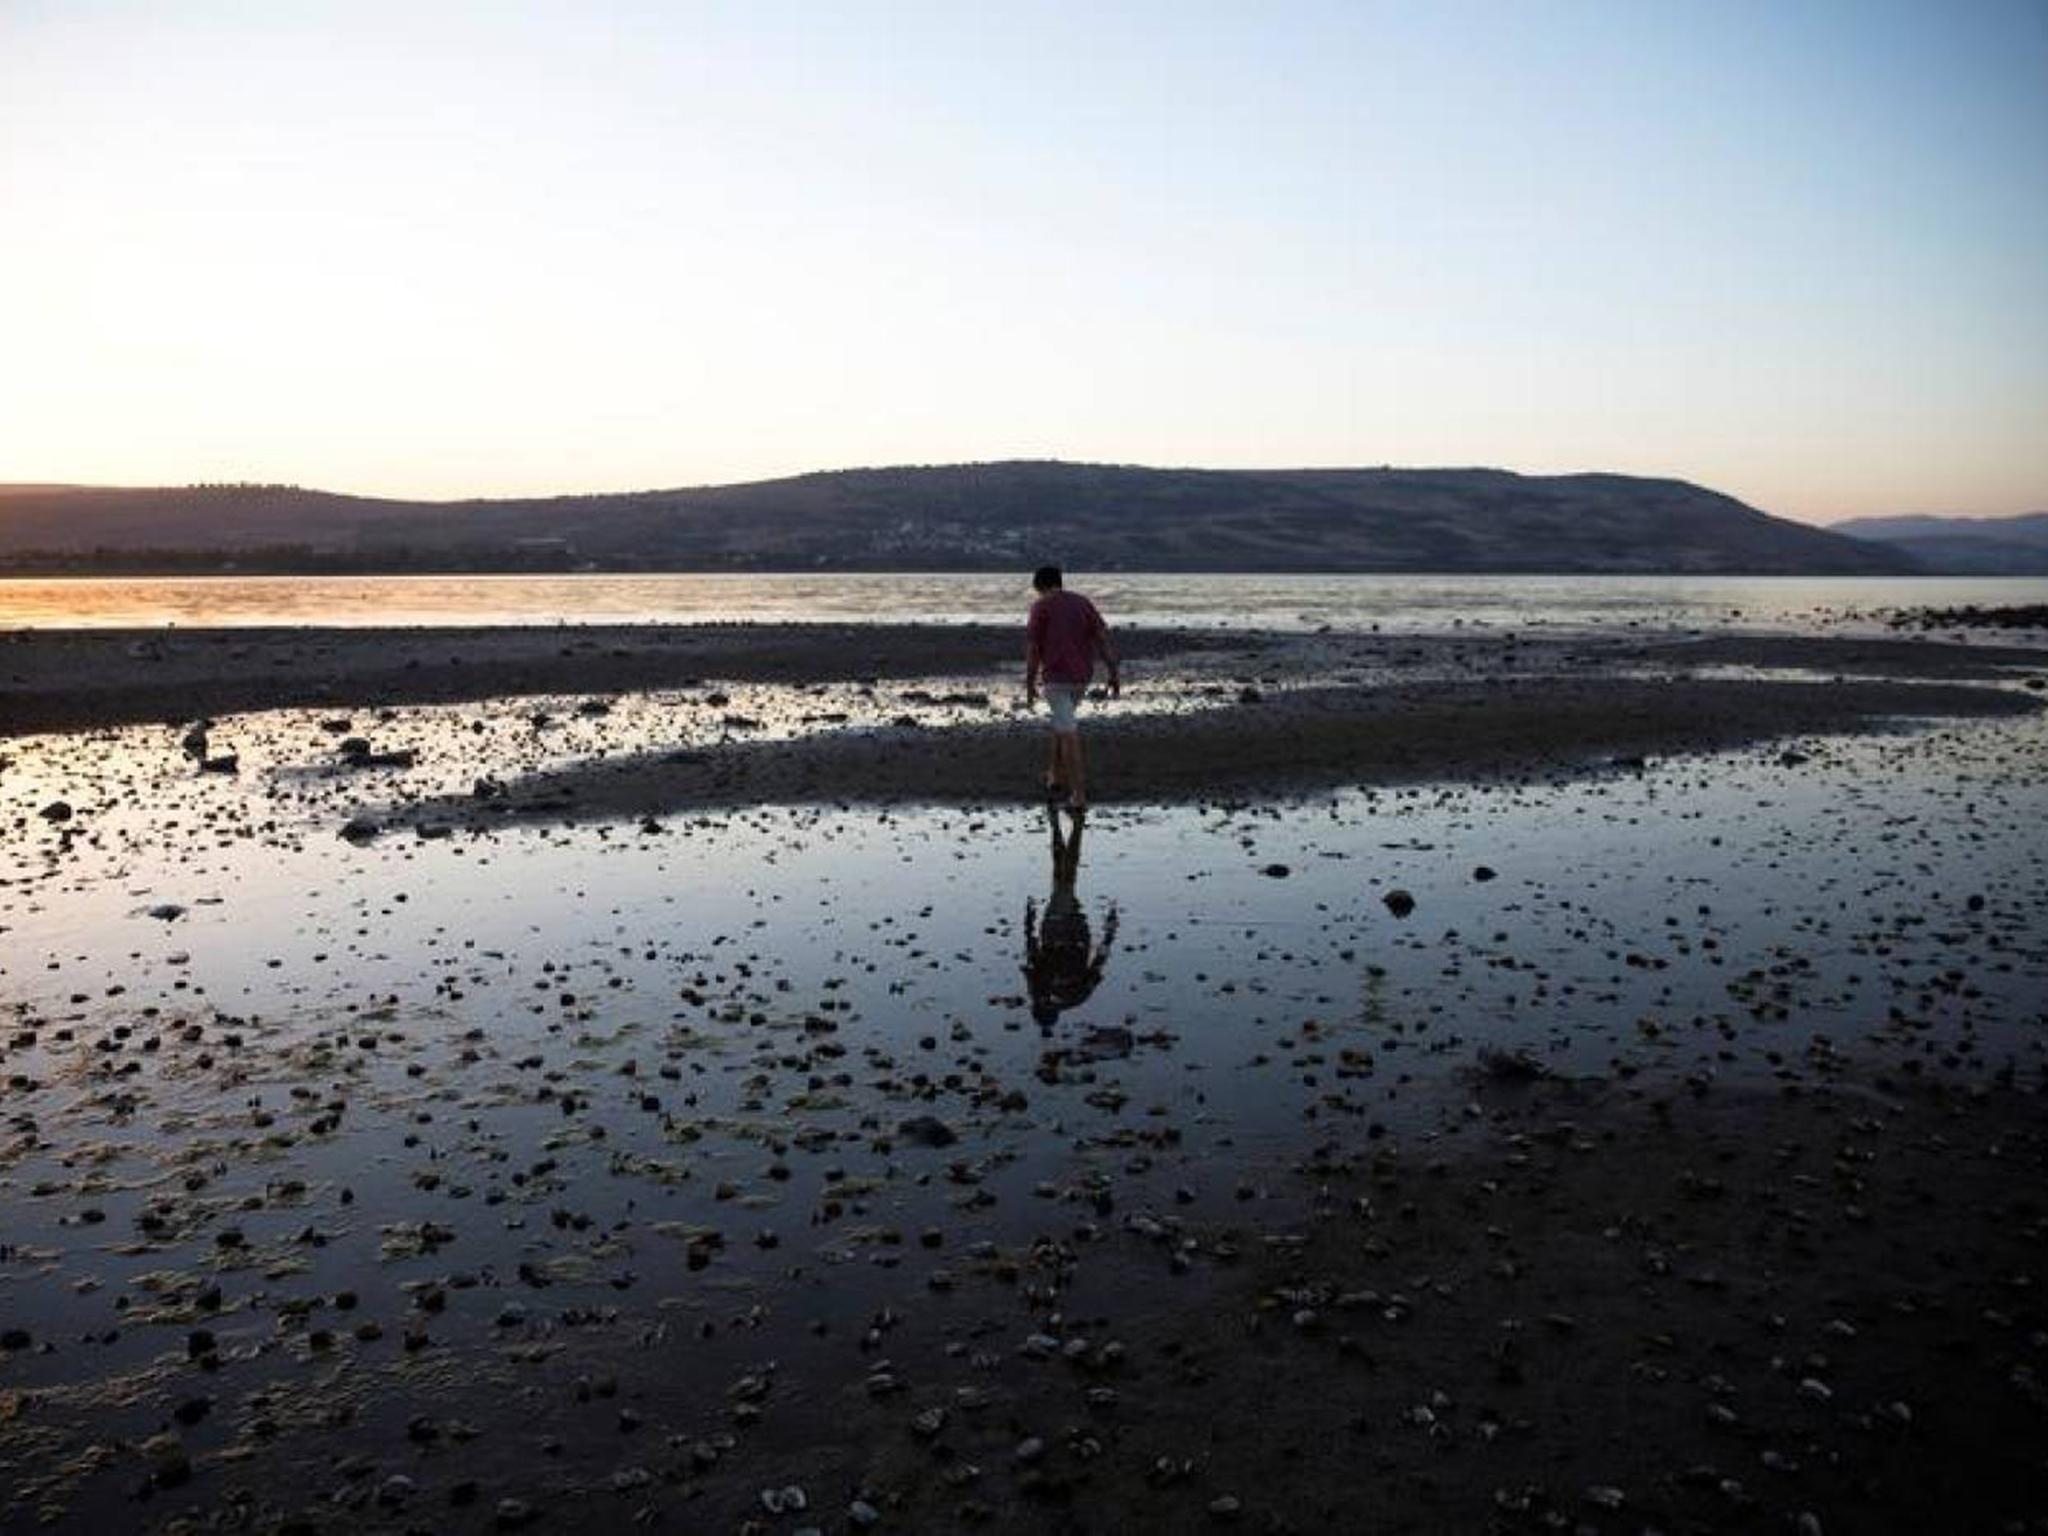 An island, which was never visible before, can now be seen on the Sea of Galilee